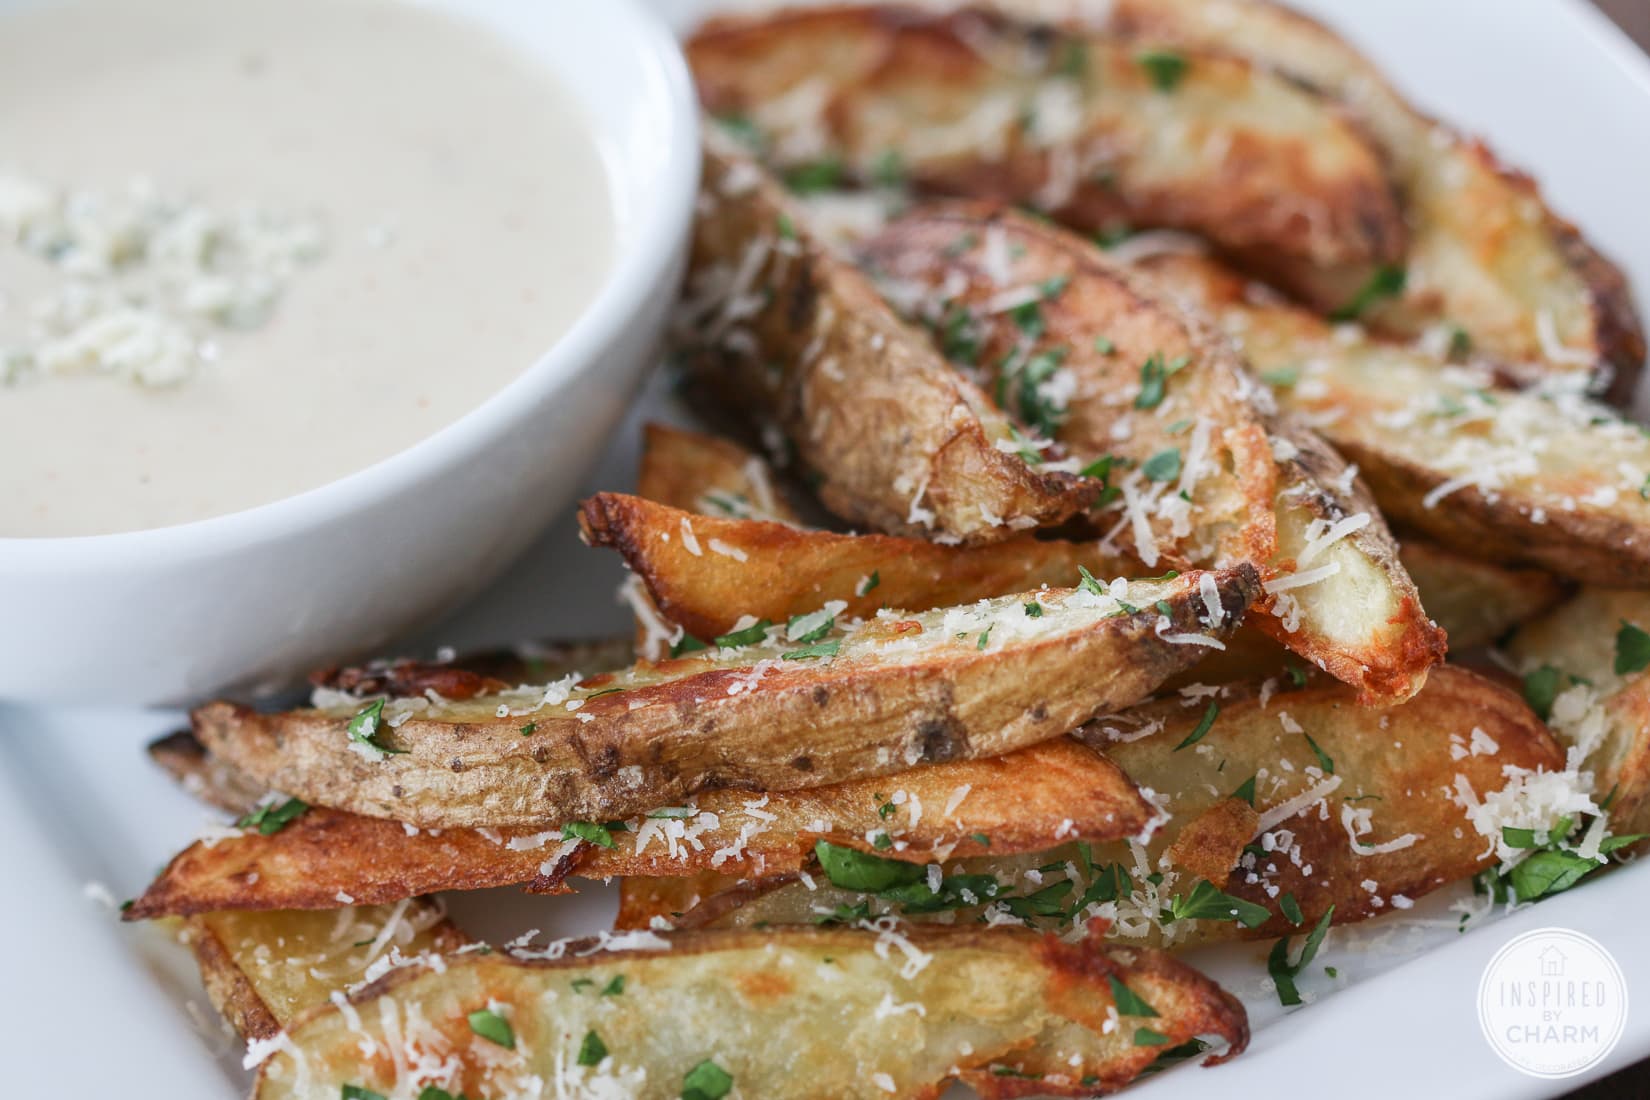 Oven Fries